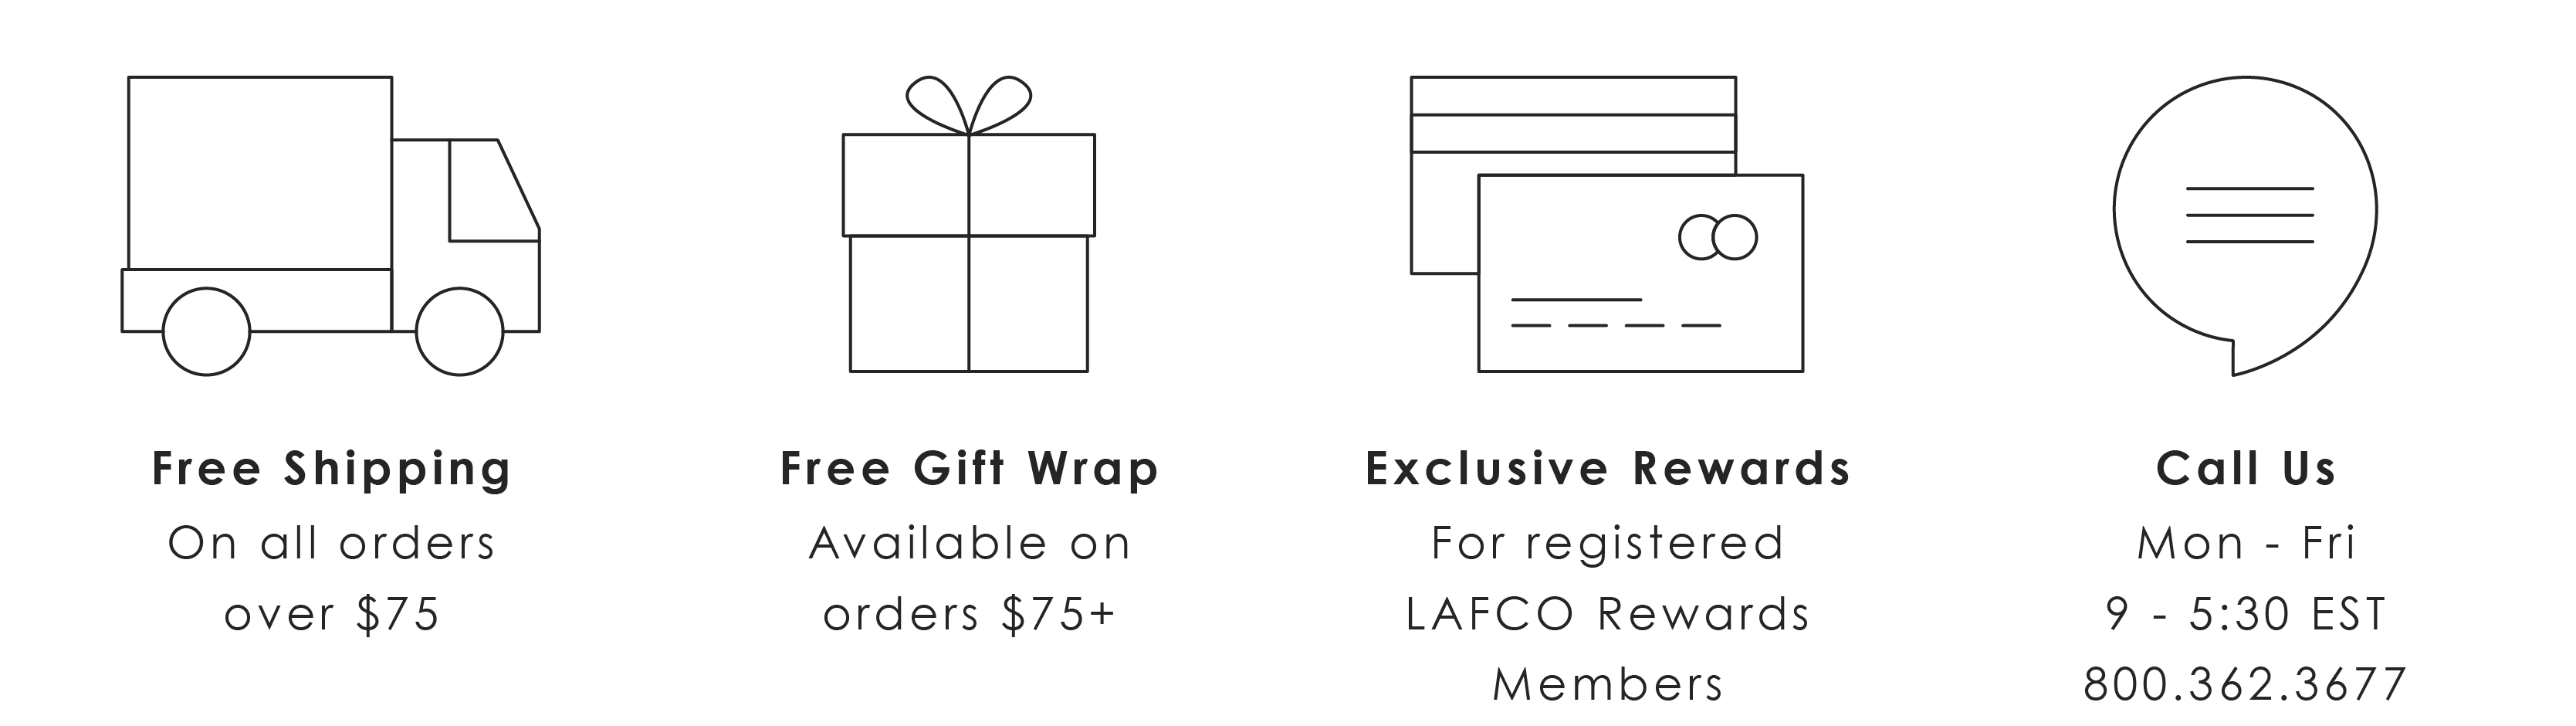  LQ Free Shipping On all orders over $75 Free Gift Wrap Available on orders $75 Exclusive Rewards For registered LAFCO Rewards Members Call Us Mon - Fri 9 - 5:30 EST 800.362.3677 